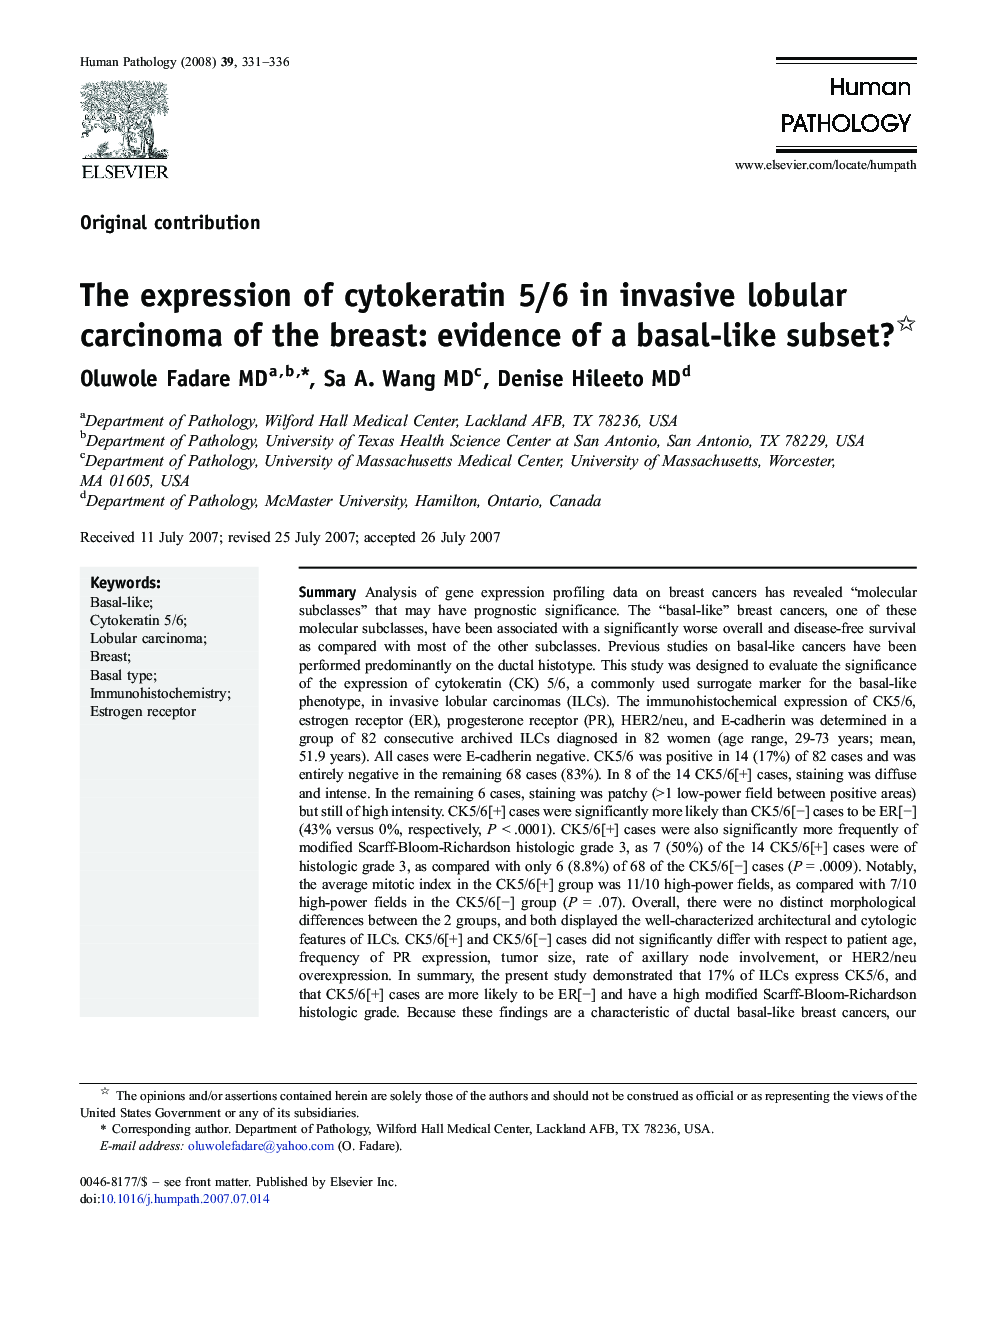 The expression of cytokeratin 5/6 in invasive lobular carcinoma of the breast: evidence of a “basal-like” subset?